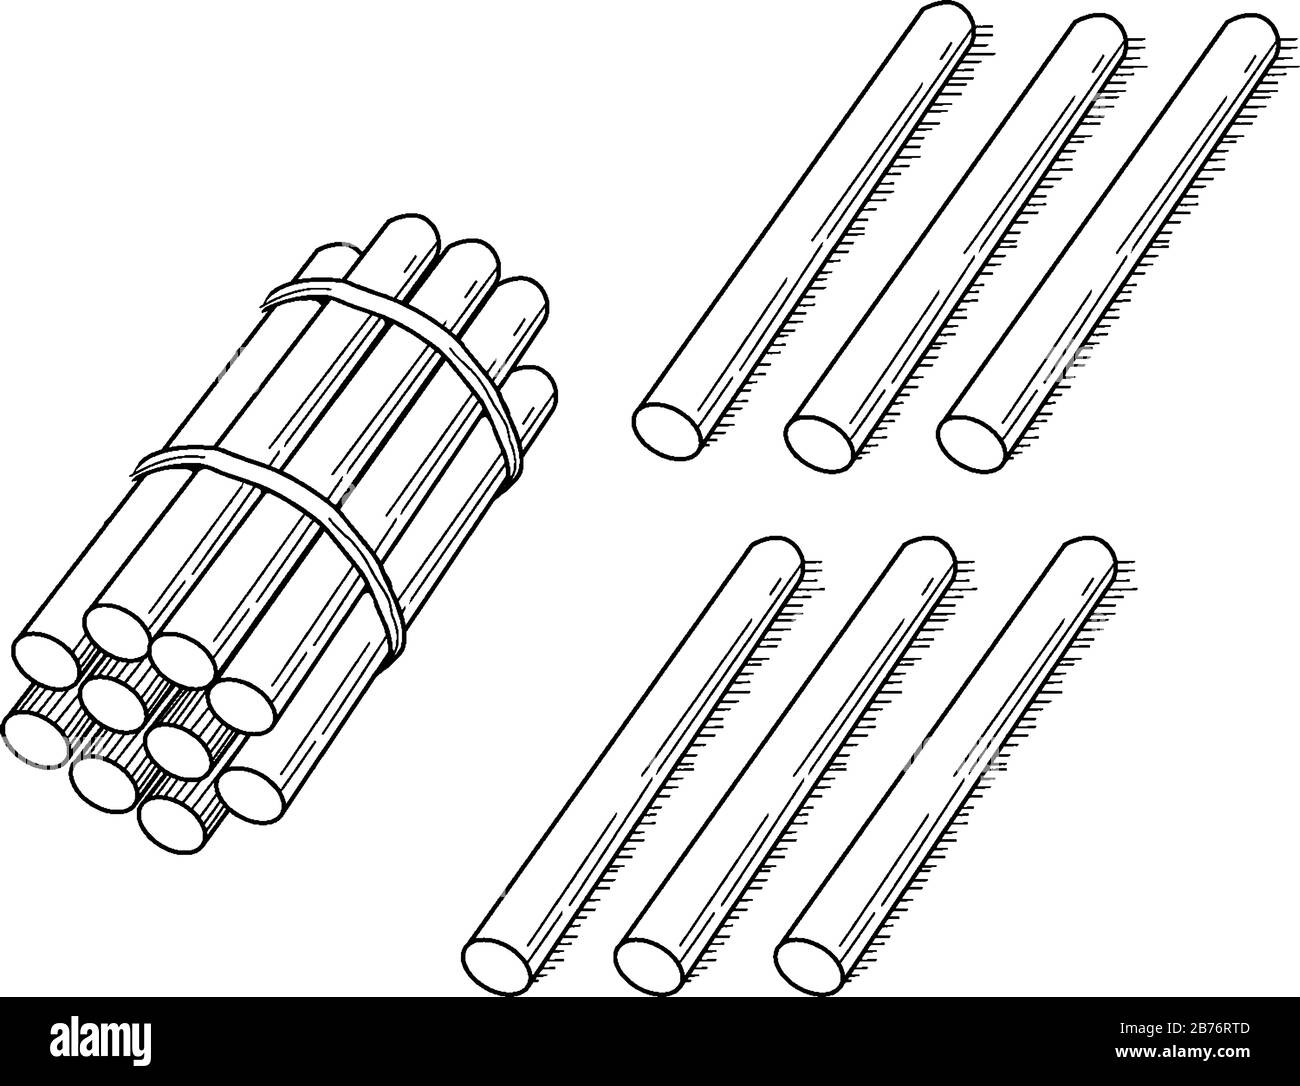 A typical representation of a bundle of 16 sticks bundled in tens that can be used when teaching counting, grouping, and place value, vintage line dra Stock Vector